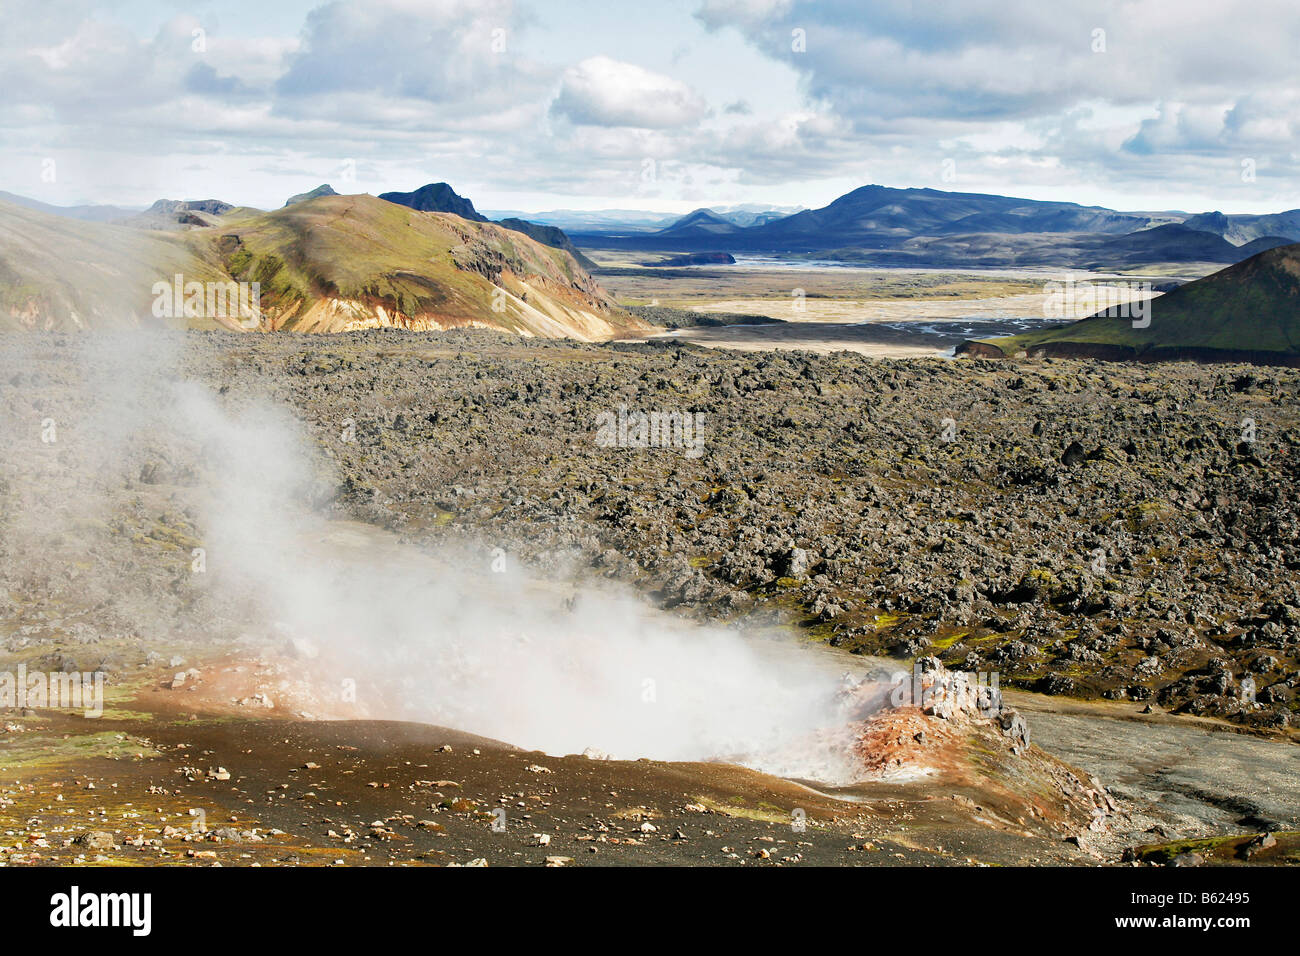 Hot and steaming springs, fumaroles, in the lava fields in front of the colourful Rhyolith Mountains of Landmannalaugar, Icelan Stock Photo